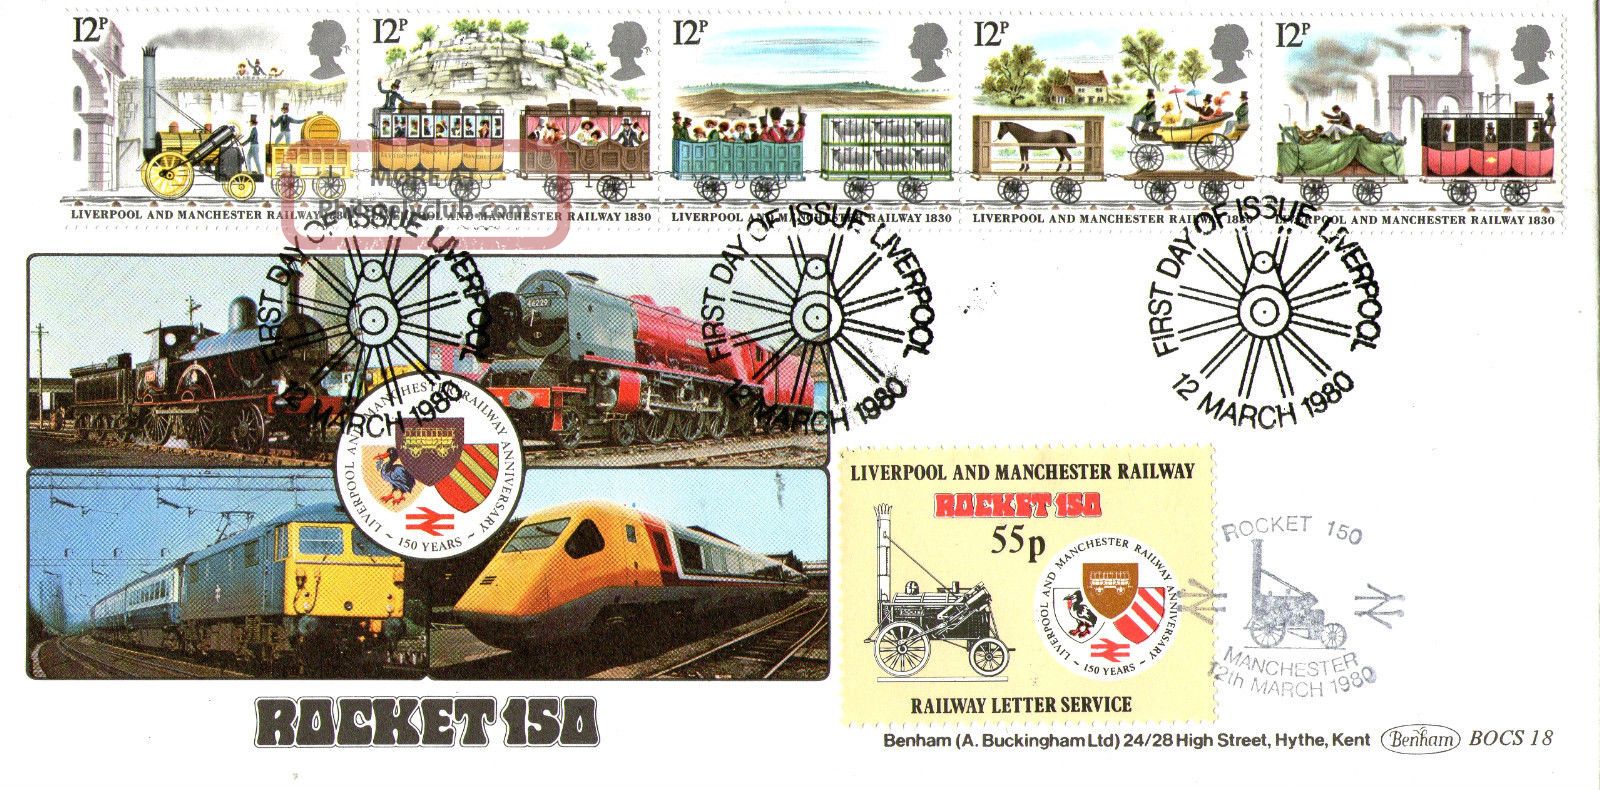 12 March 1980 Liverpool & Manchester Railway Carried First Day Cover Shs Transportation photo